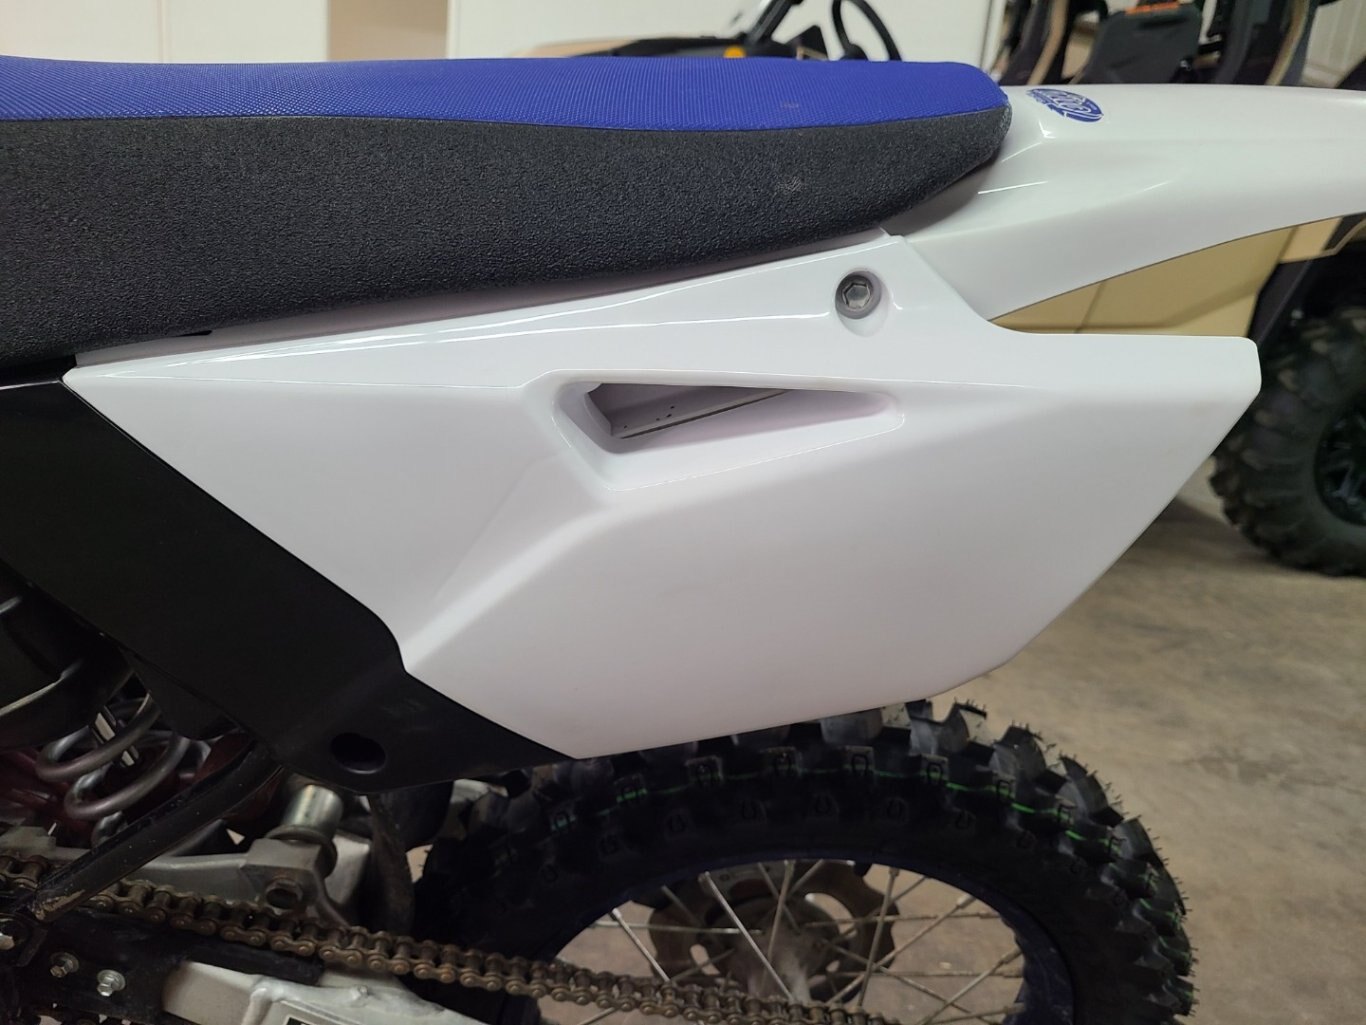 2020 YZ 85 (Private Sale)